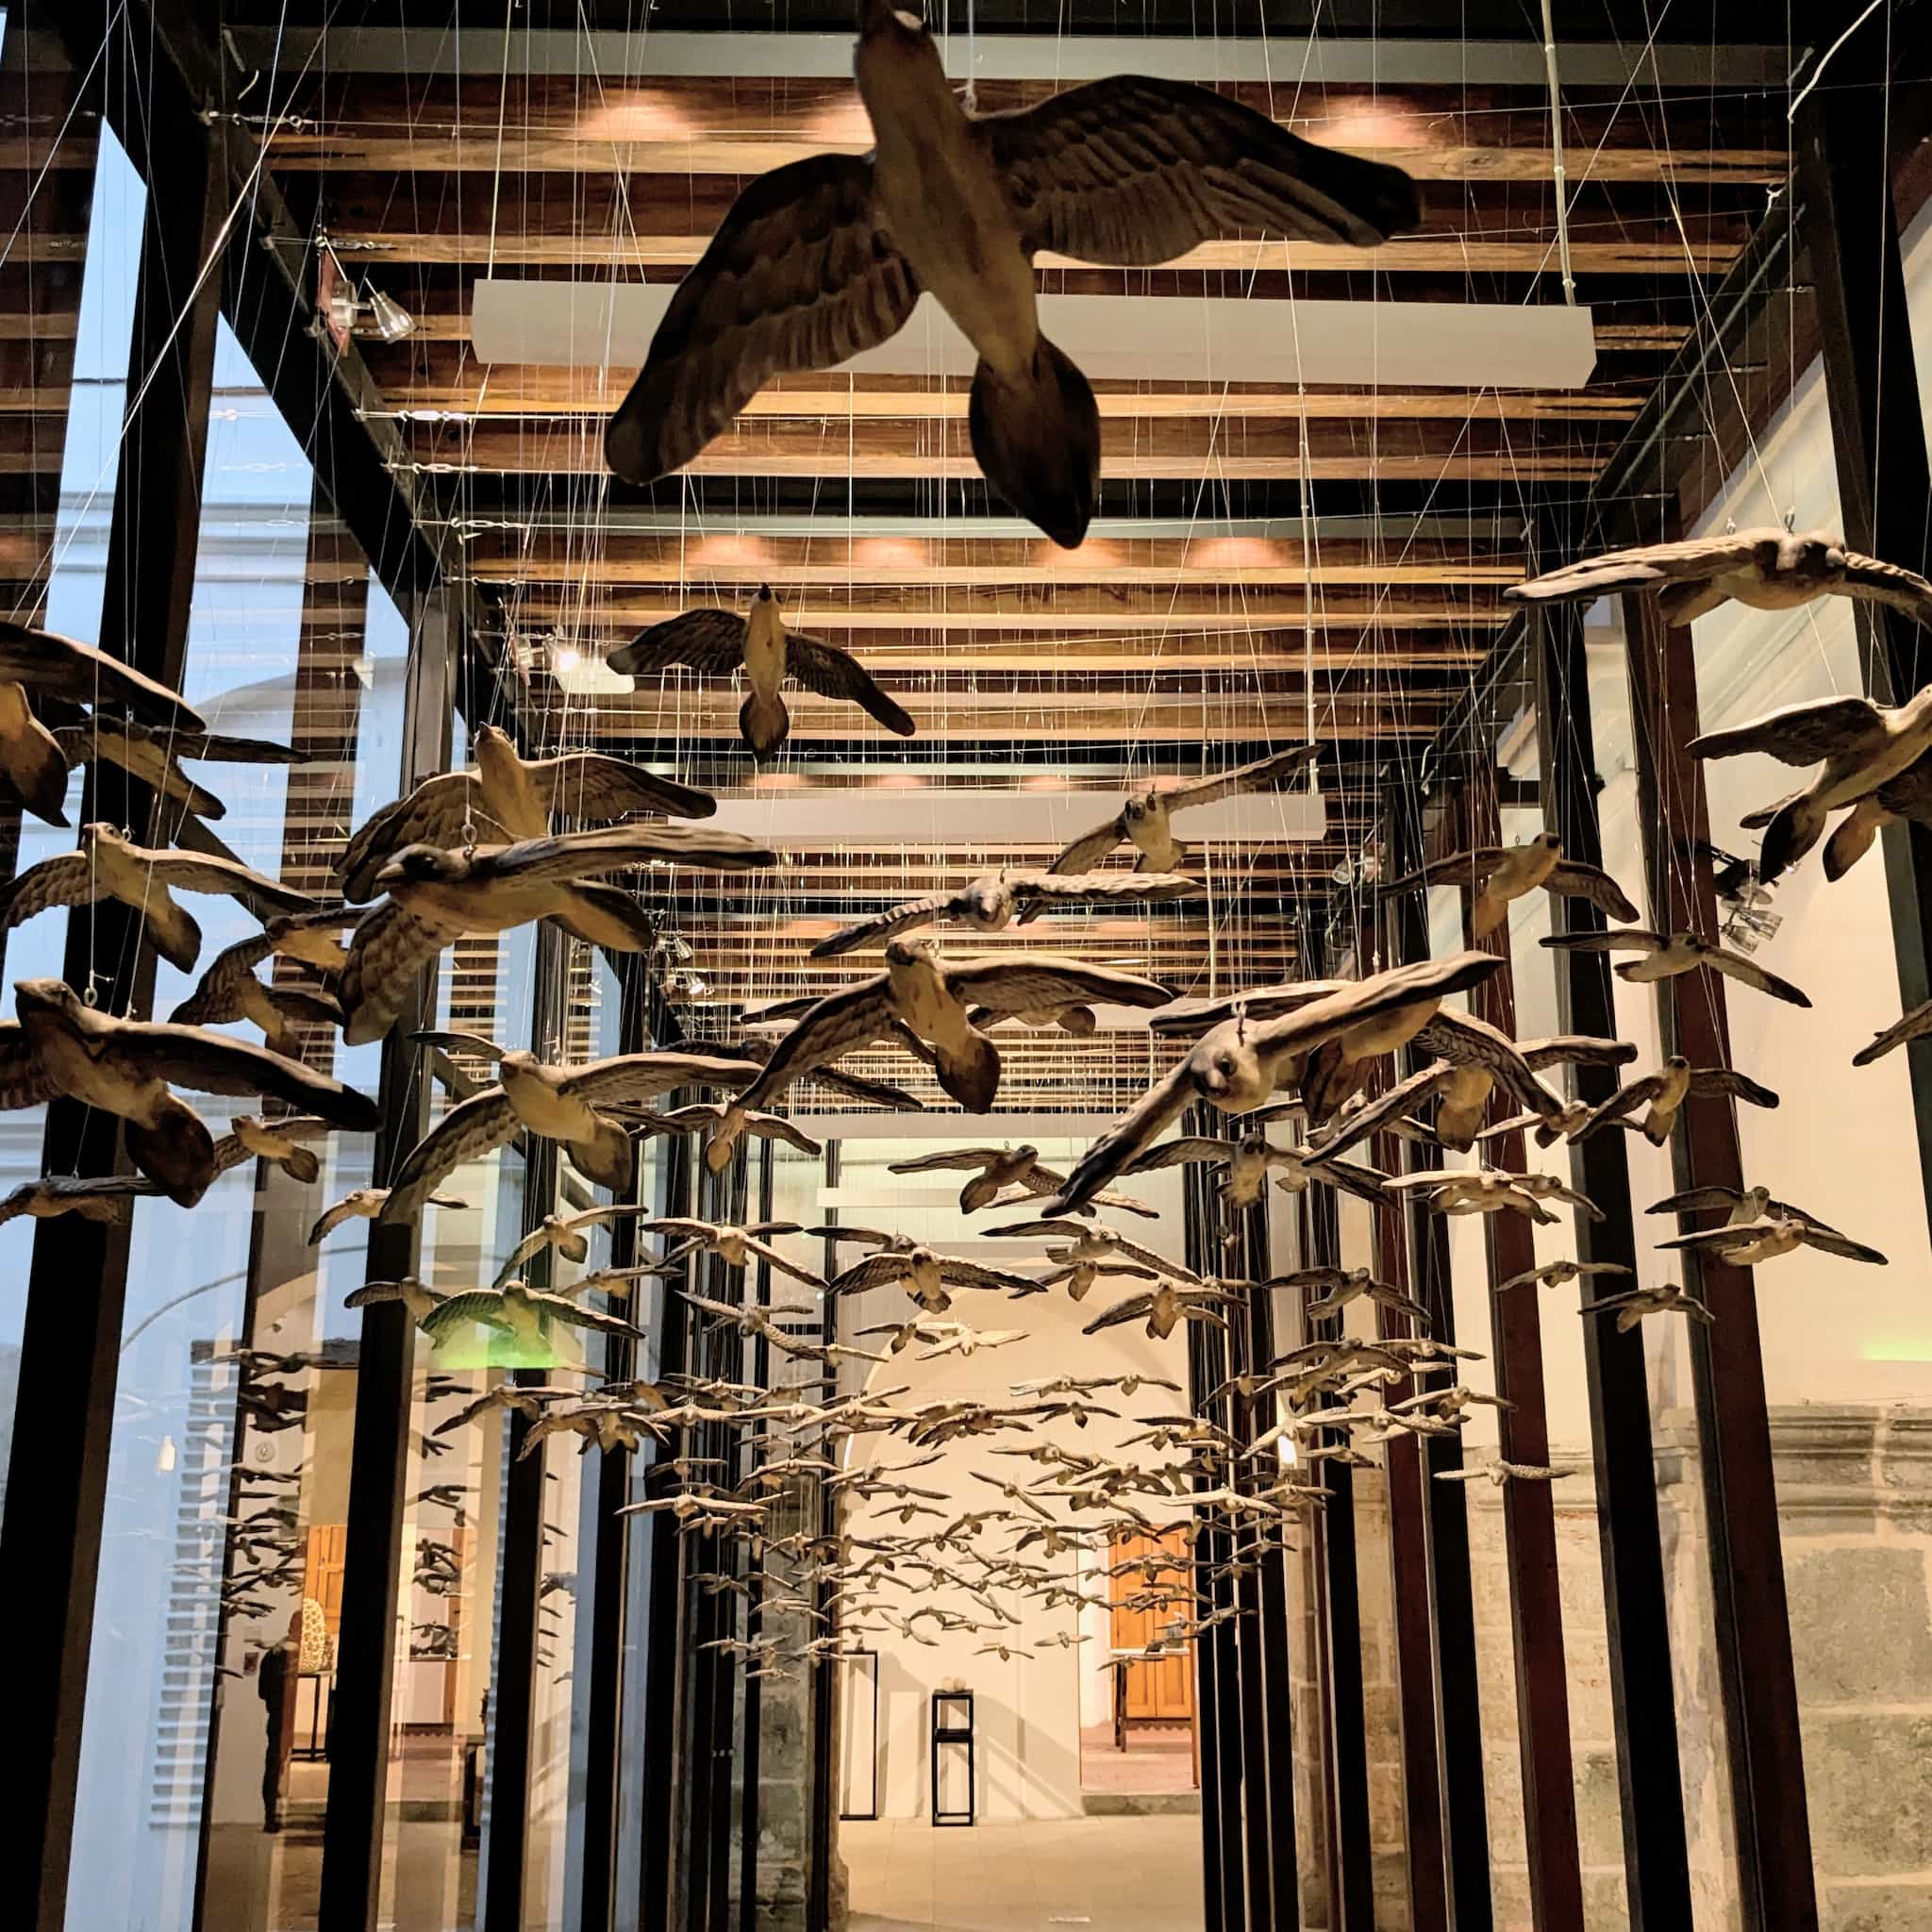 Glass hallway filled with a flock of wooden bird carvings hanging from string.